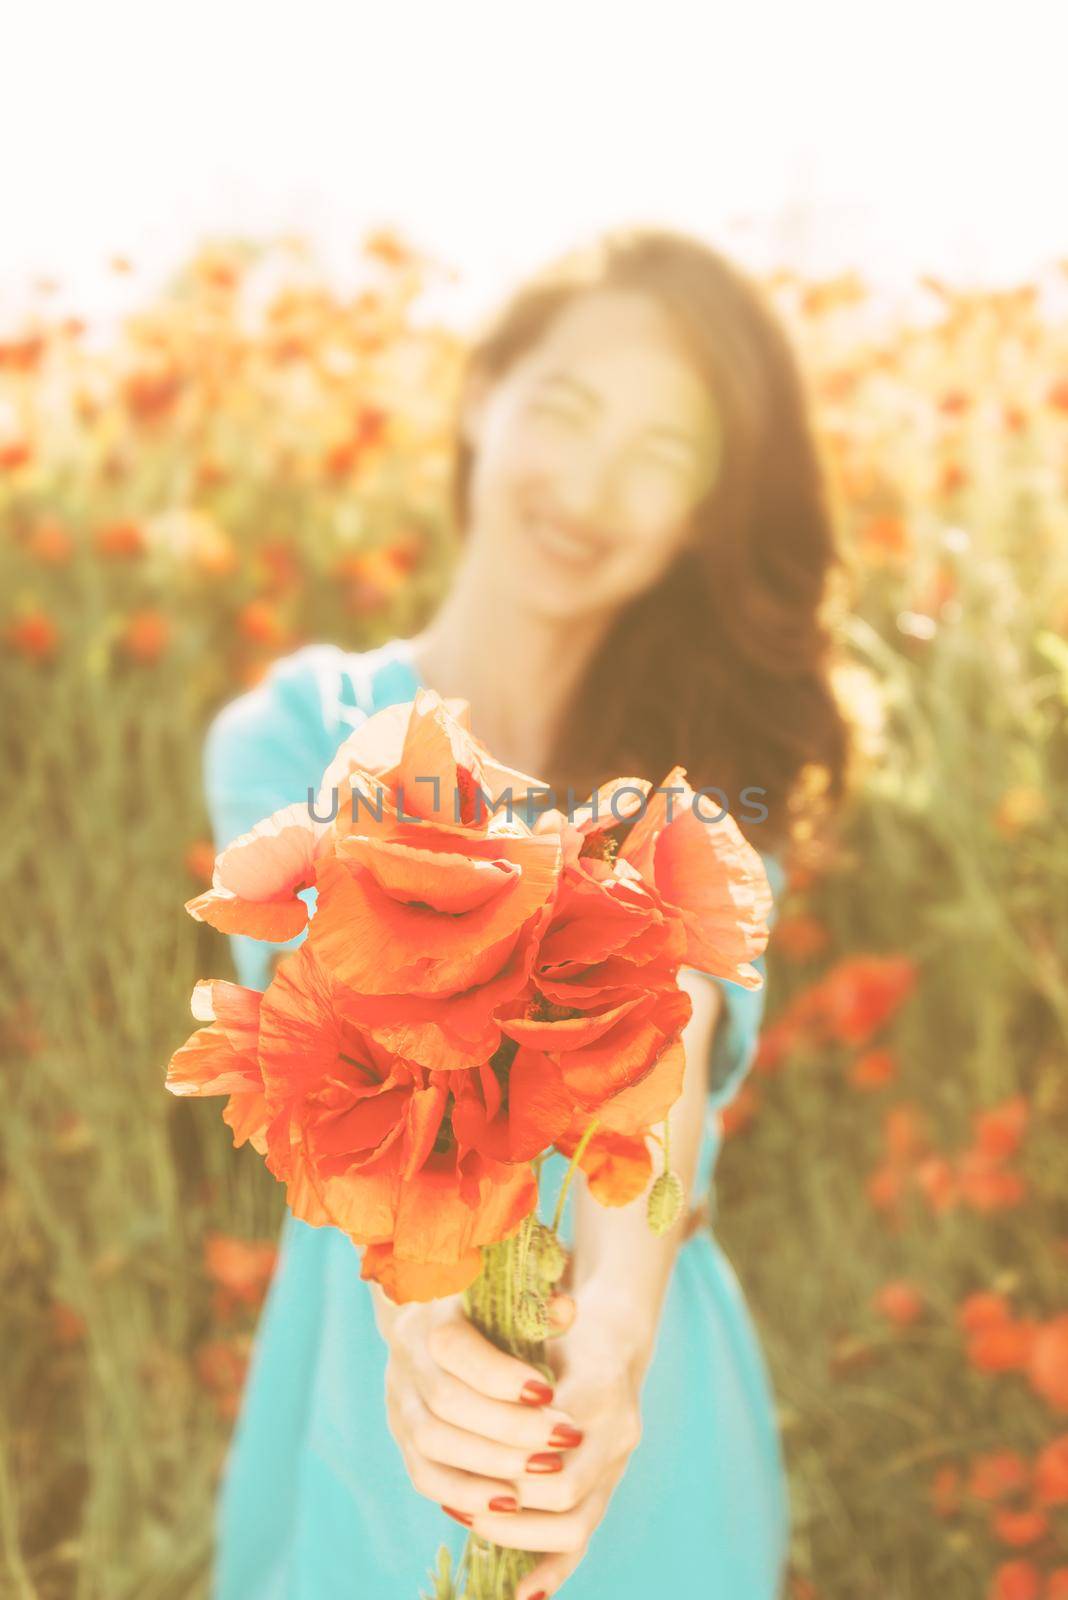 Smiling beautiful young woman giving a bouquet of red poppies in summer, focus on flowers.